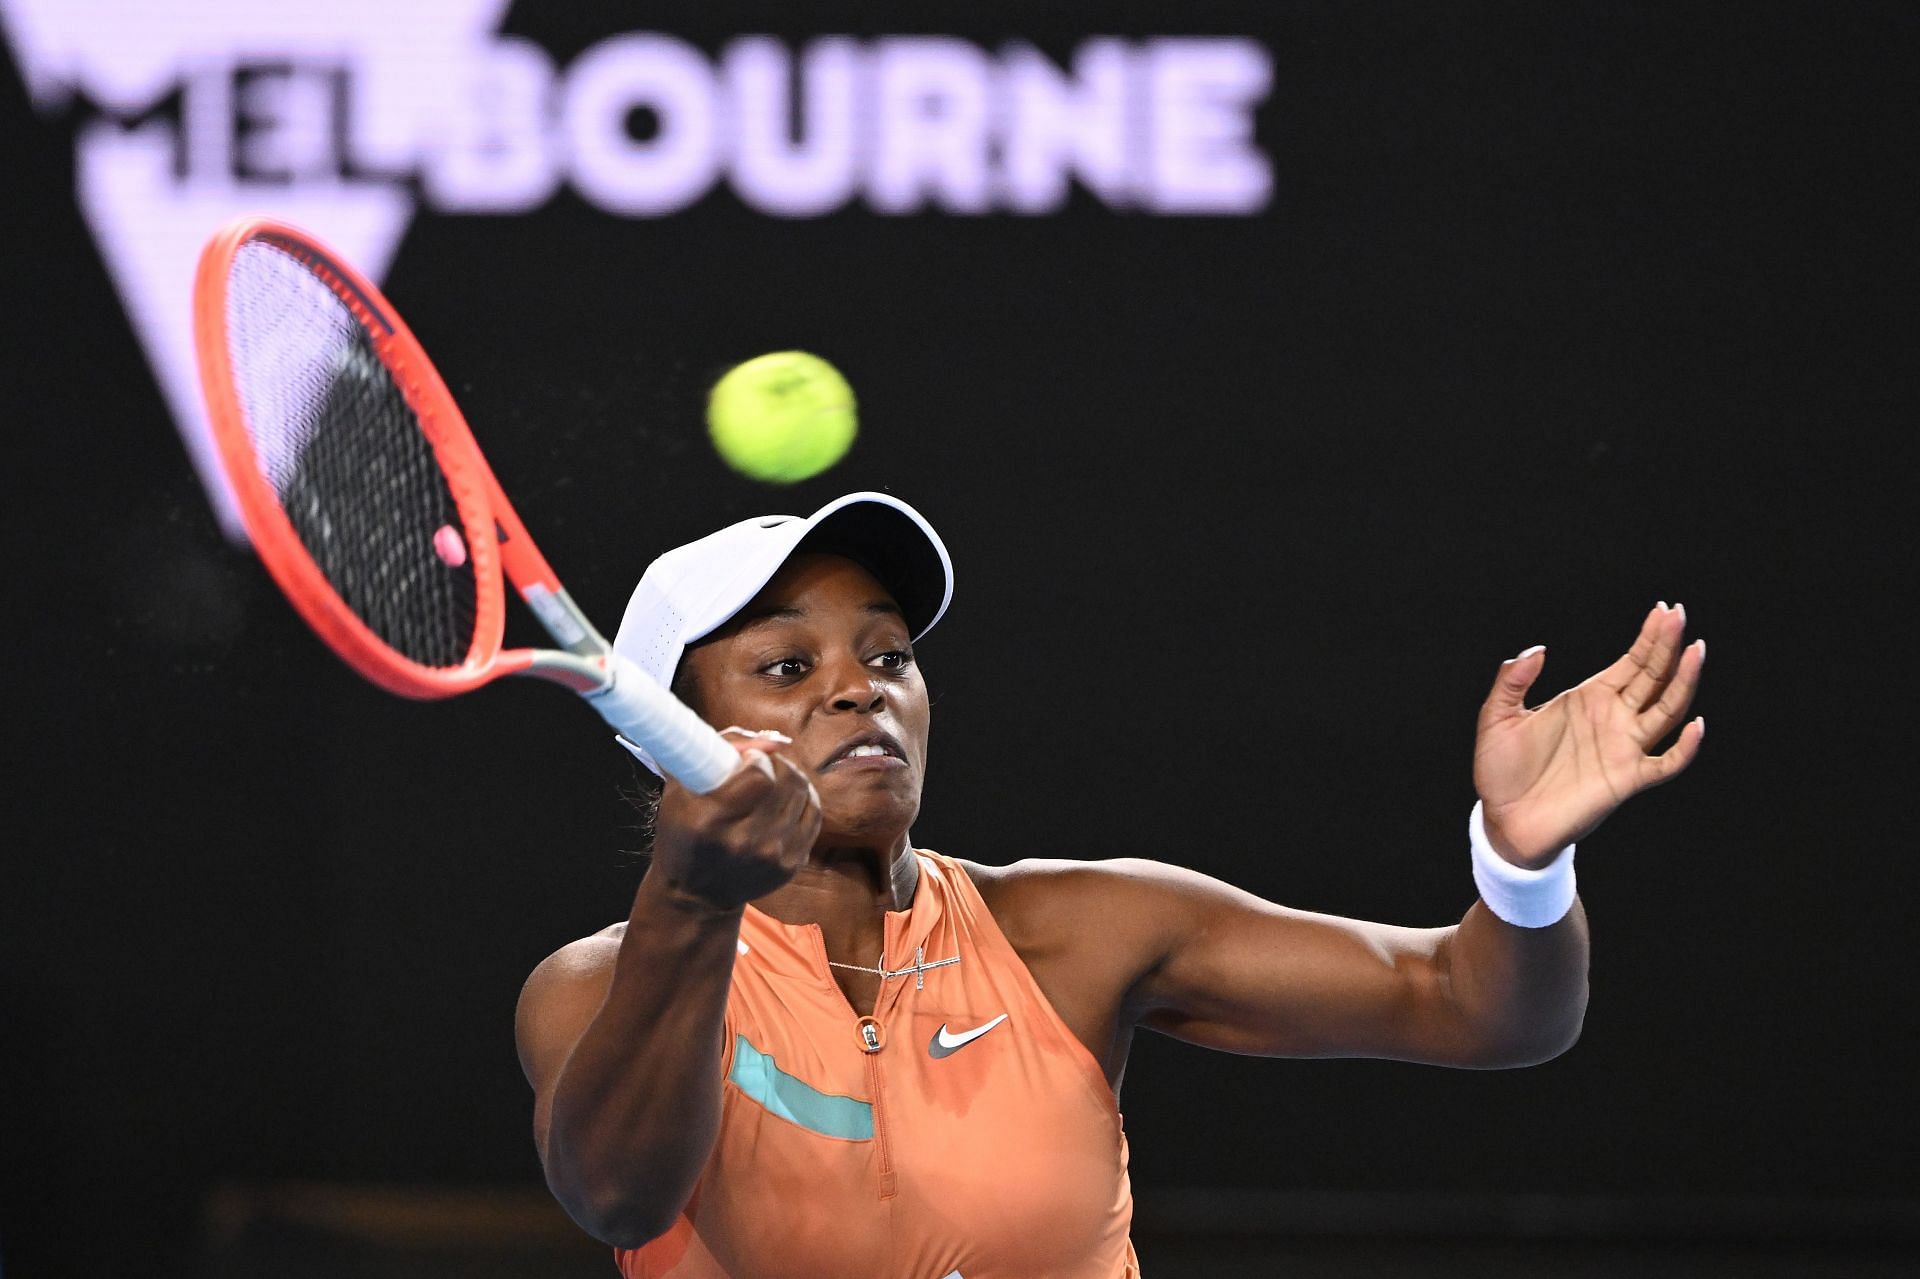 Sloane Stephens is the first seed that could run into Raducanu.